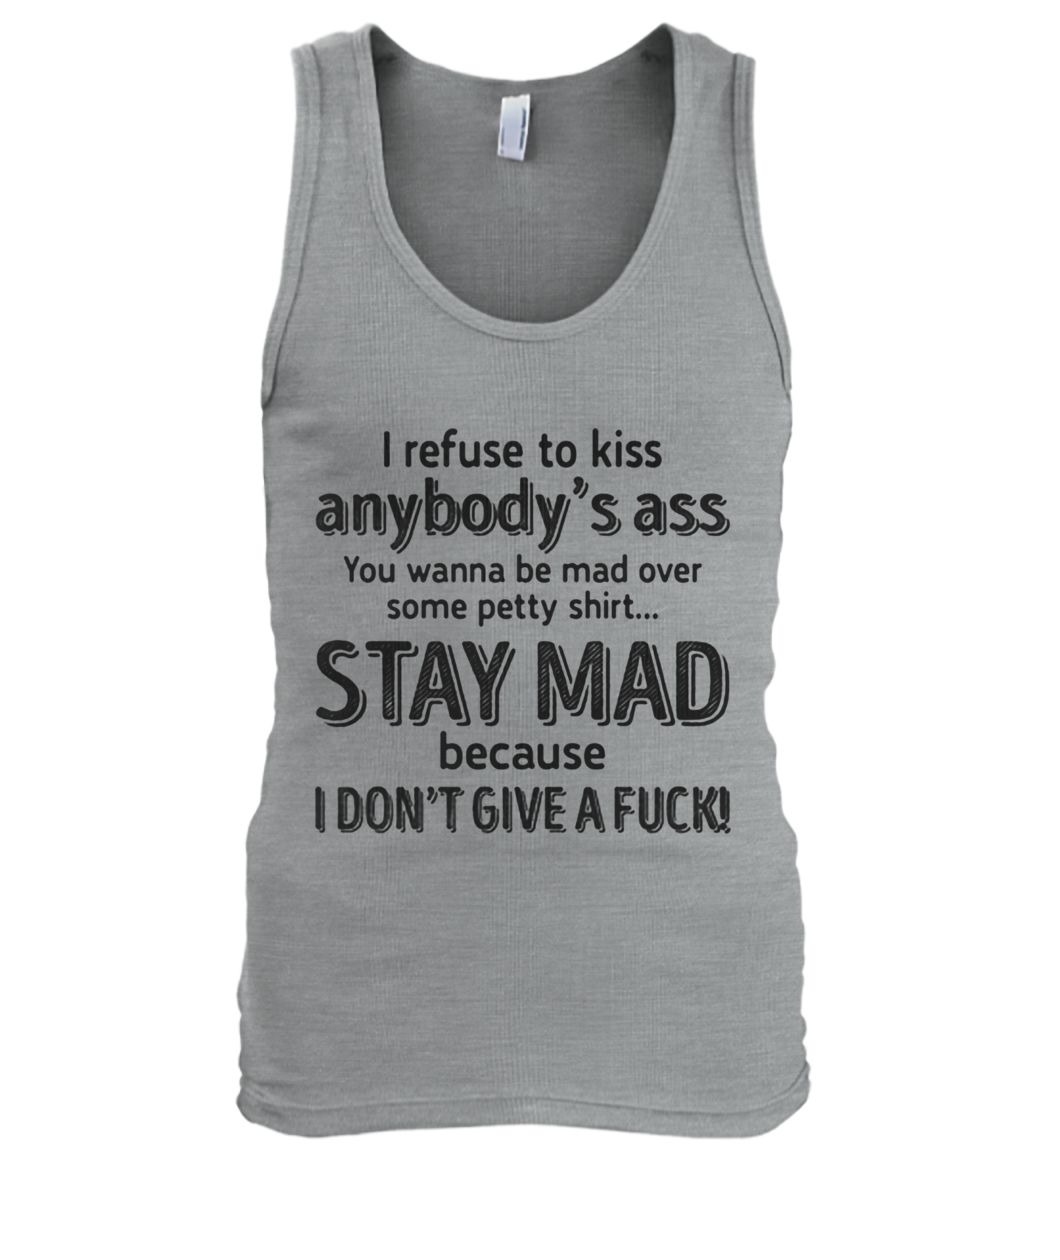 I refuse to kiss anybody's ass you wanna be mad over some petty shit stay mad men's tank top